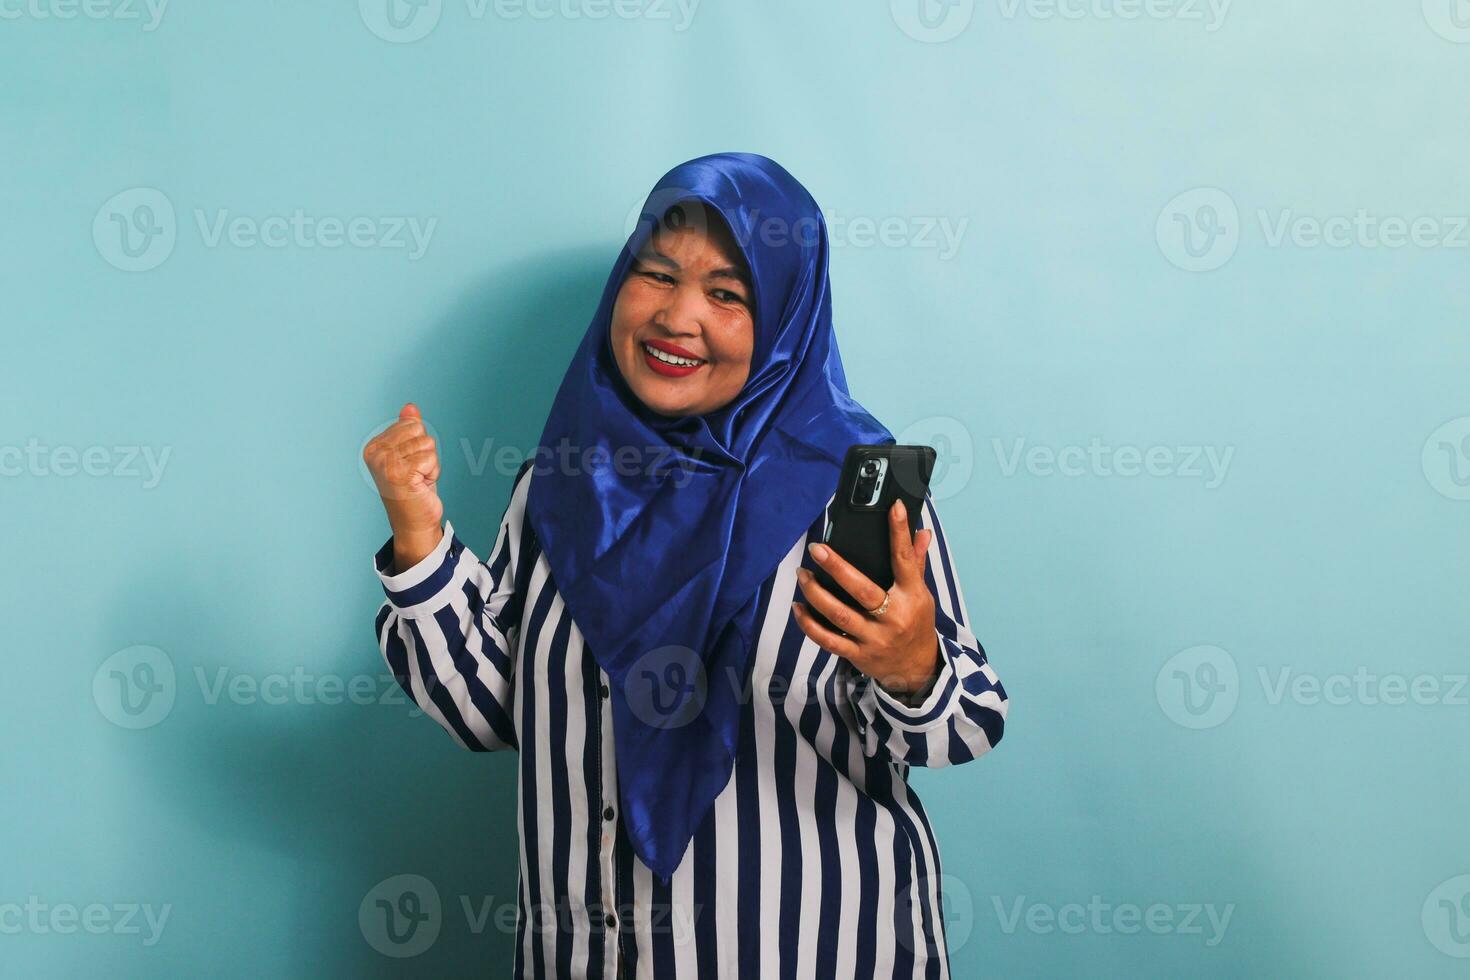 An excited middle-aged Asian woman in a blue hijab and a striped shirt is showing an enthusiastic expression while holding a mobile phone. She is isolated on a blue background photo